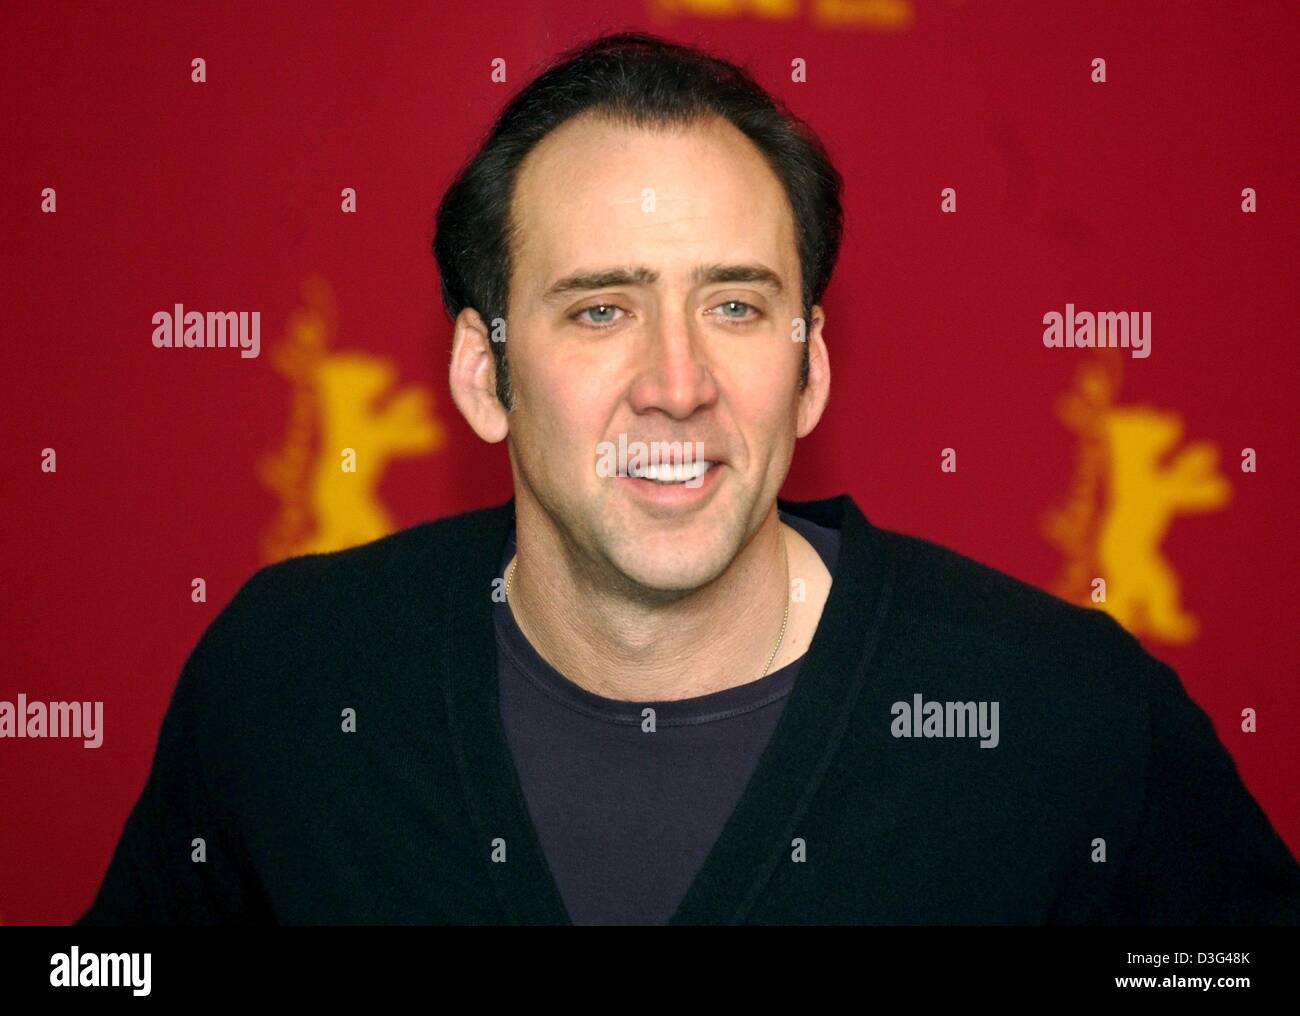 (dpa) - US actor Nicolas Cage, pictured during the screening of his latest movie 'Adaptation' at the 53rd annual film festival in Berlin, 8 February 2003. The film, in which Cage plays a pair of twin brothers, is a satire and a black comedy about Hollywood in which reality and fiction become blurred. The film runs in competition for the Golden Bear awards. Stock Photo